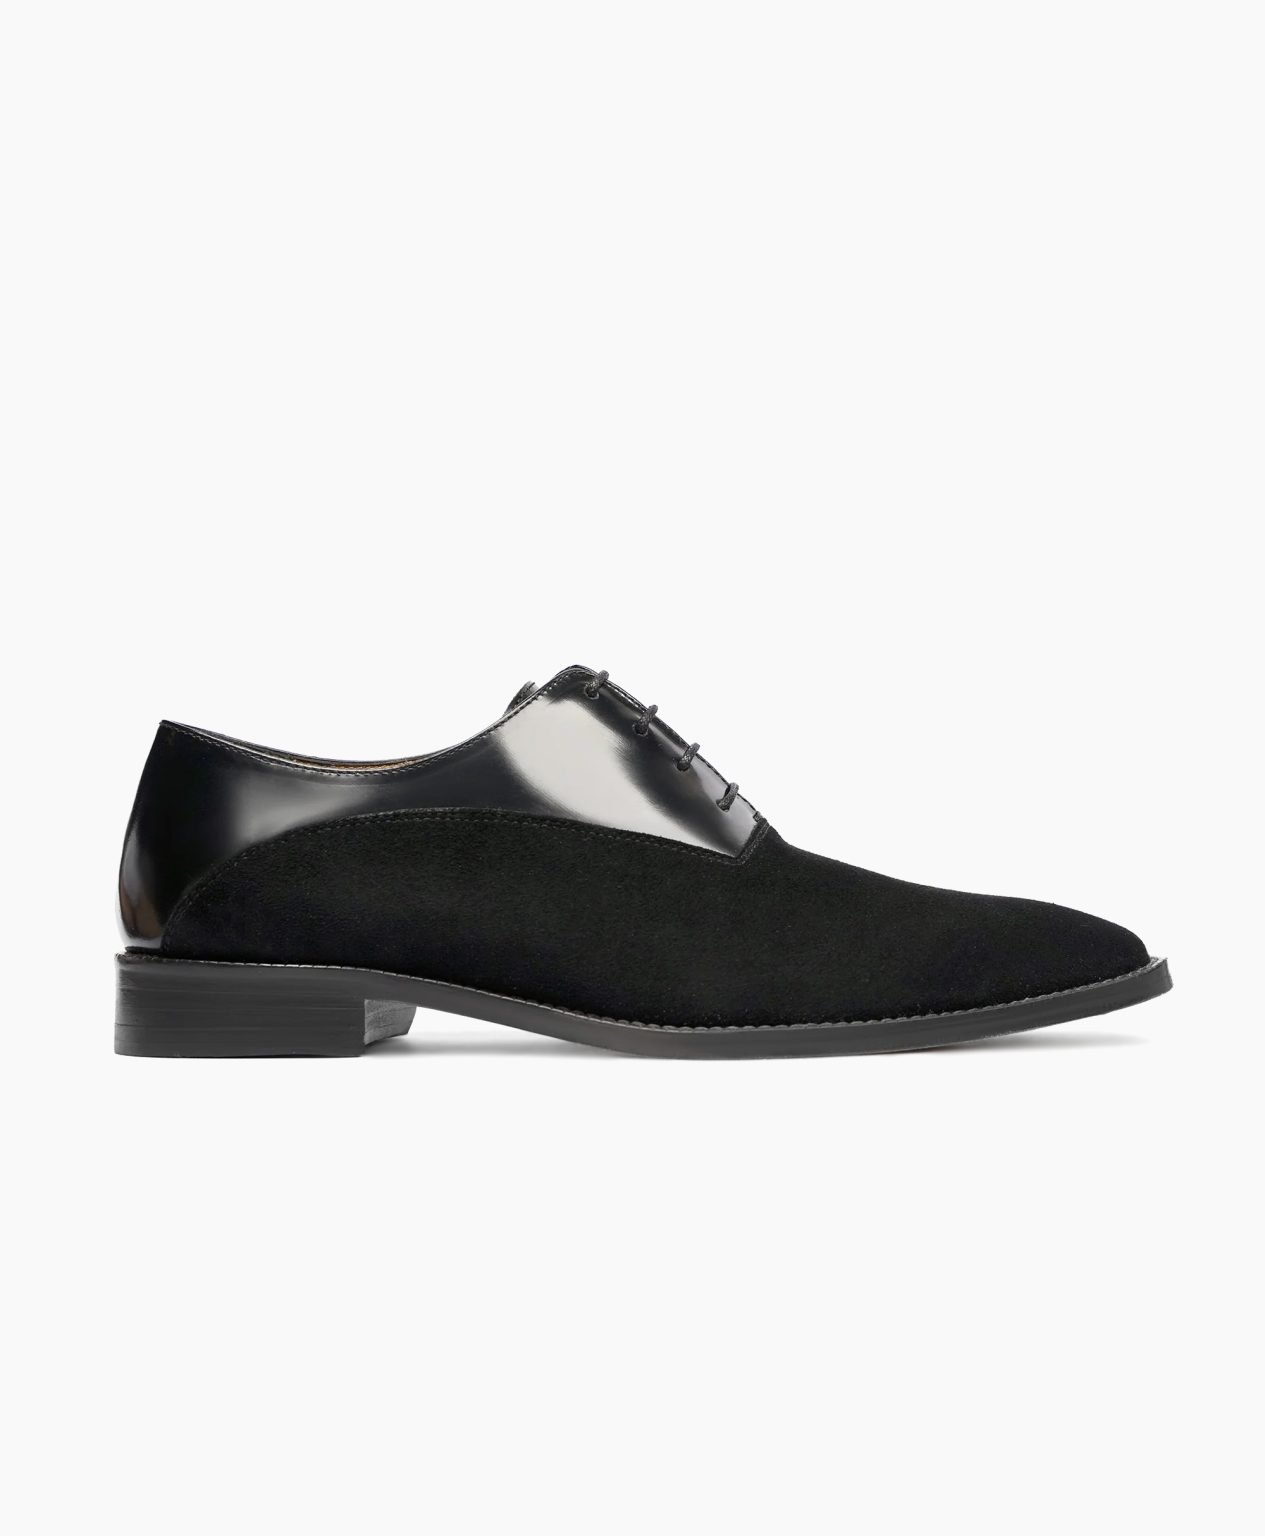 nantwich-oxford-fusion-of-black-suede-leather-shoes-image201